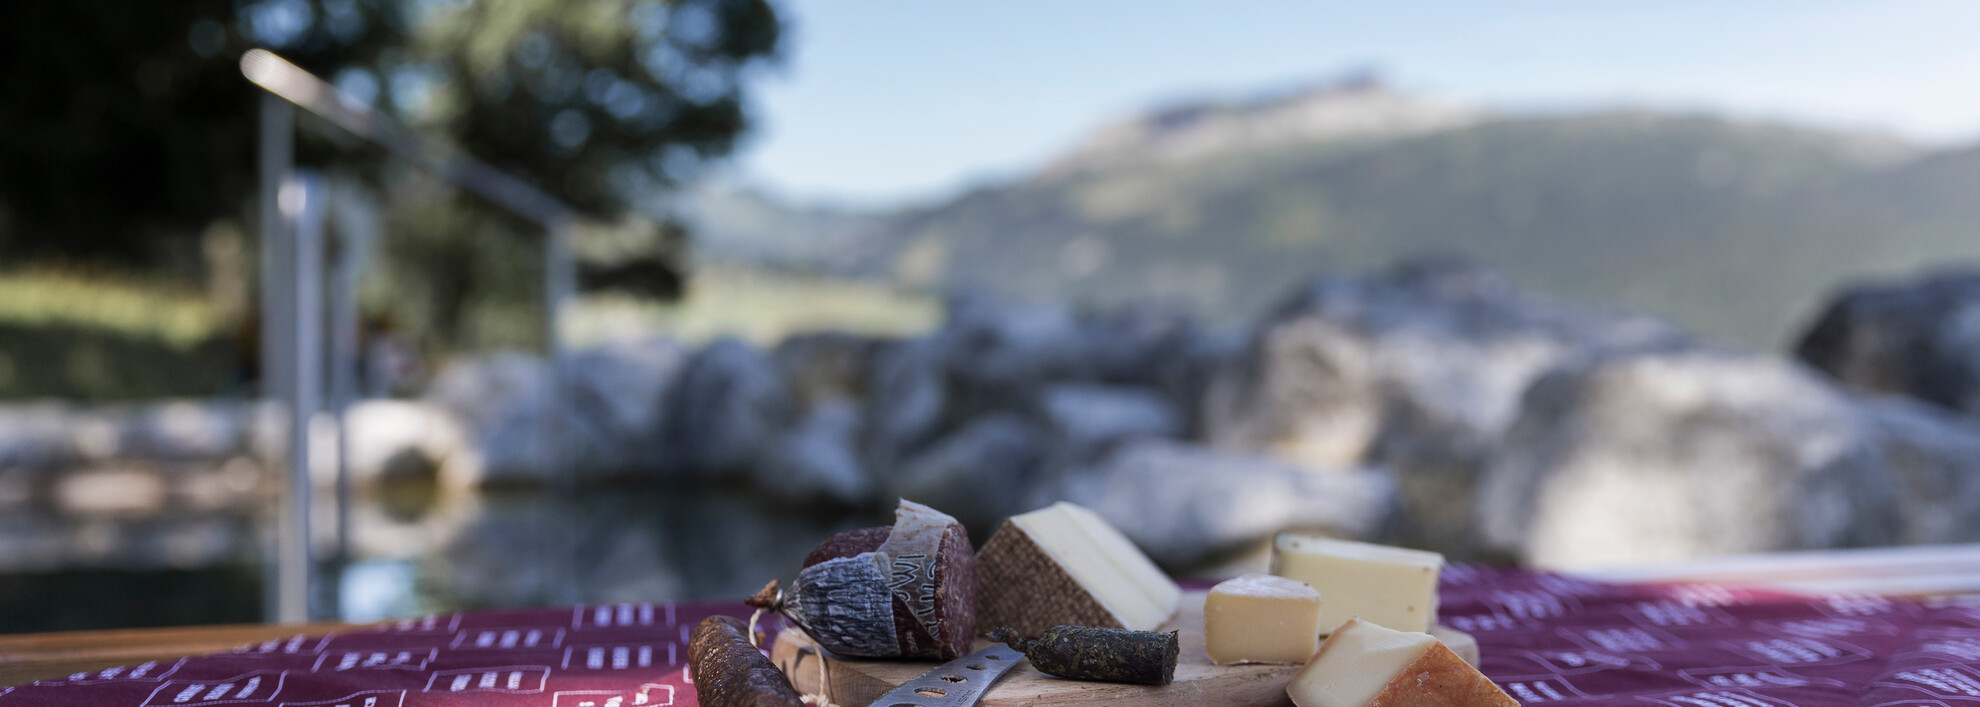 Picnic with a view of the Ifen | © Kleinwalsertal Tourismus eGen | Photographer: Oliver Farys